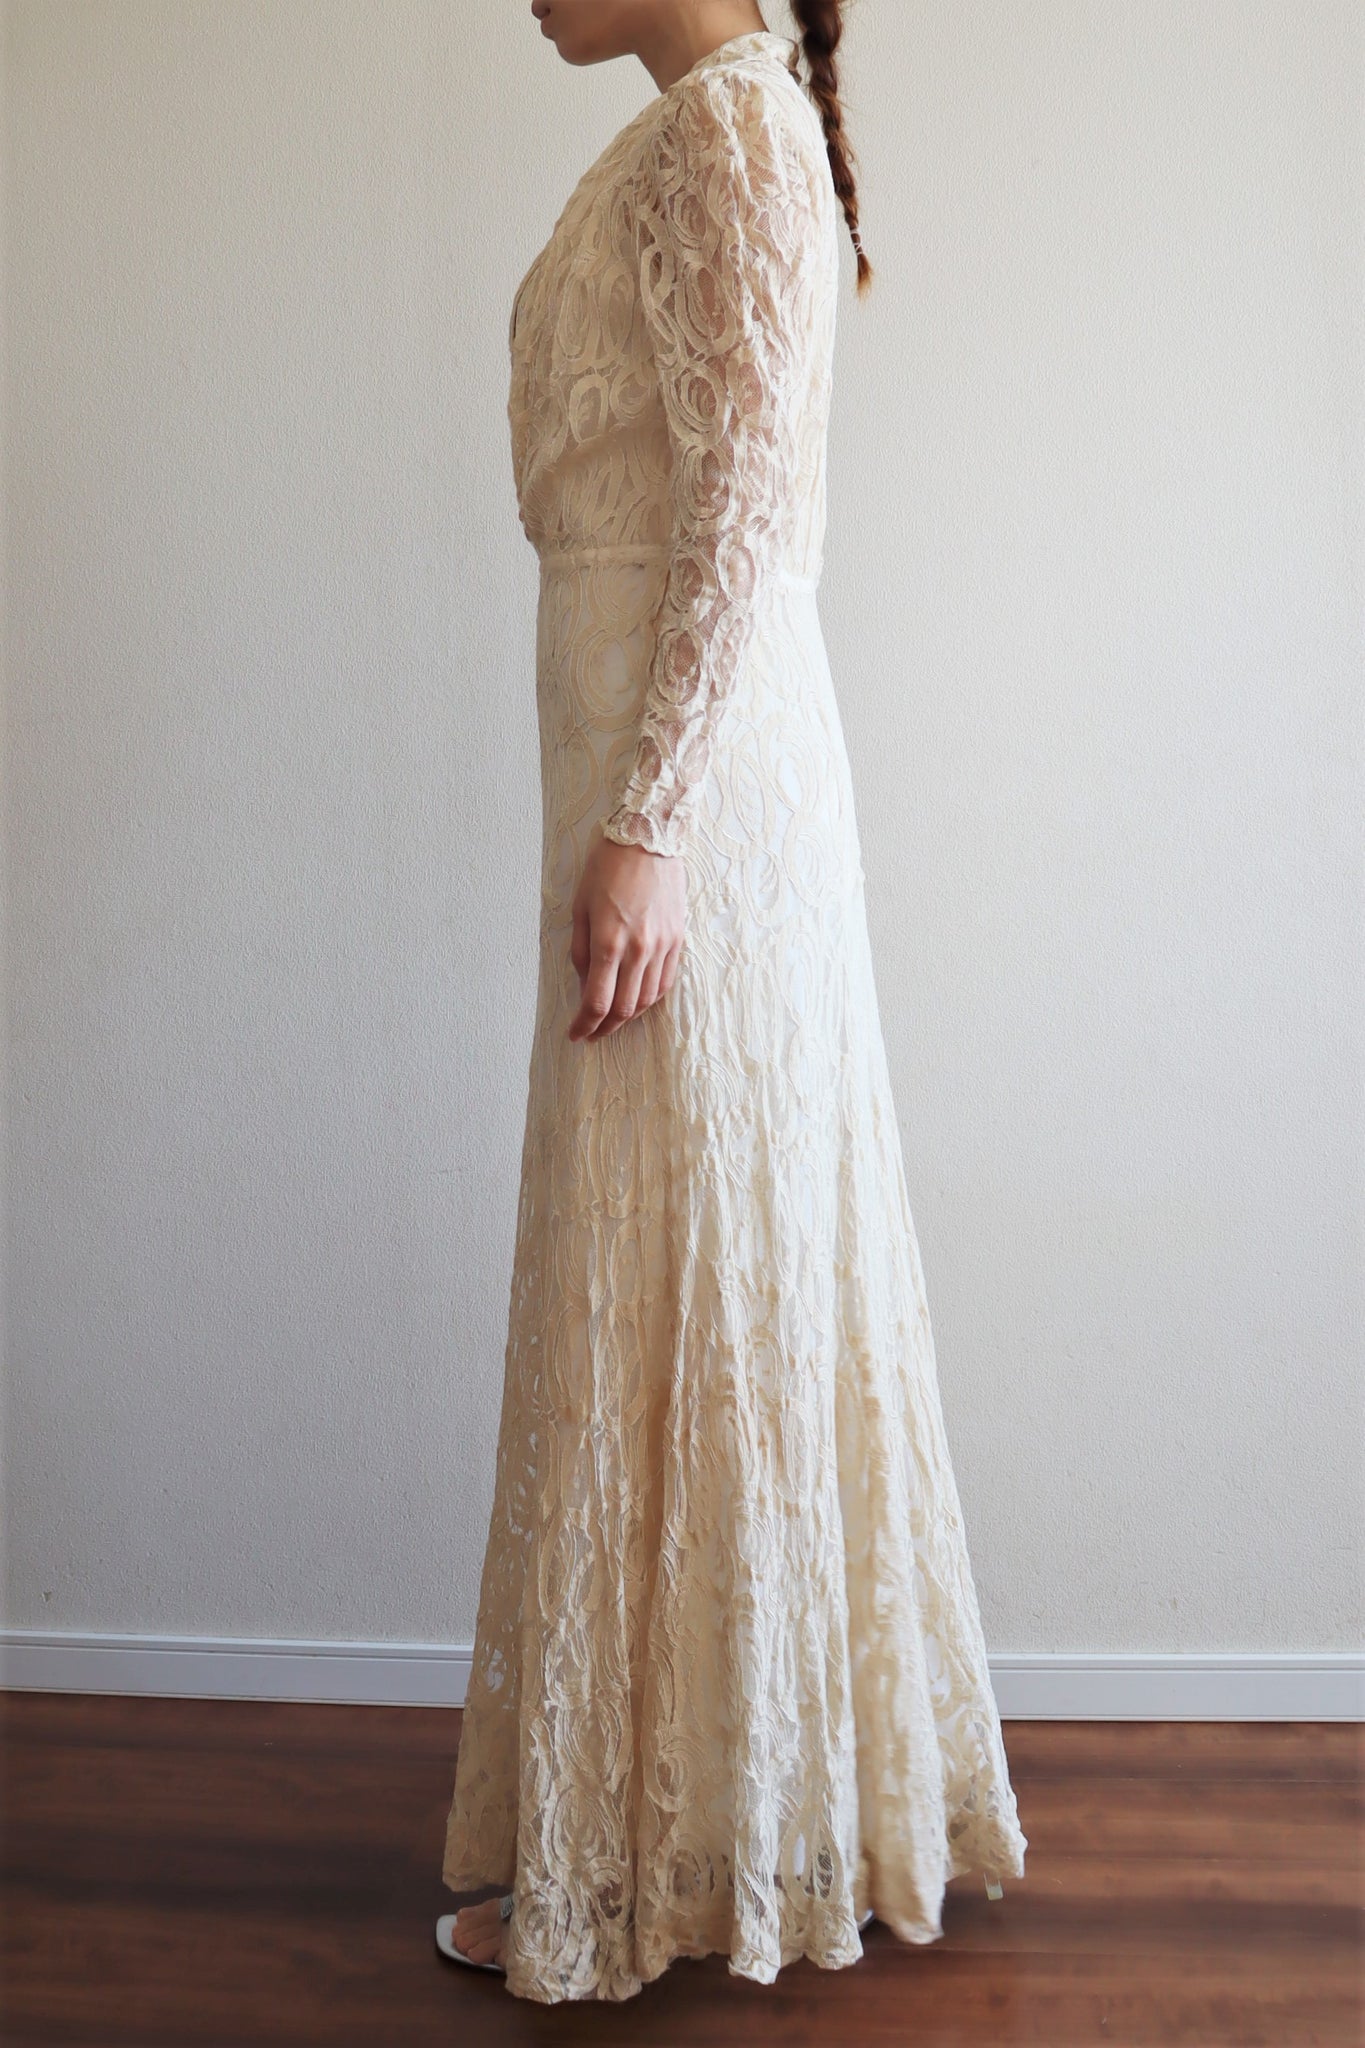 Vintage Hand Made Lace Maxi Dress